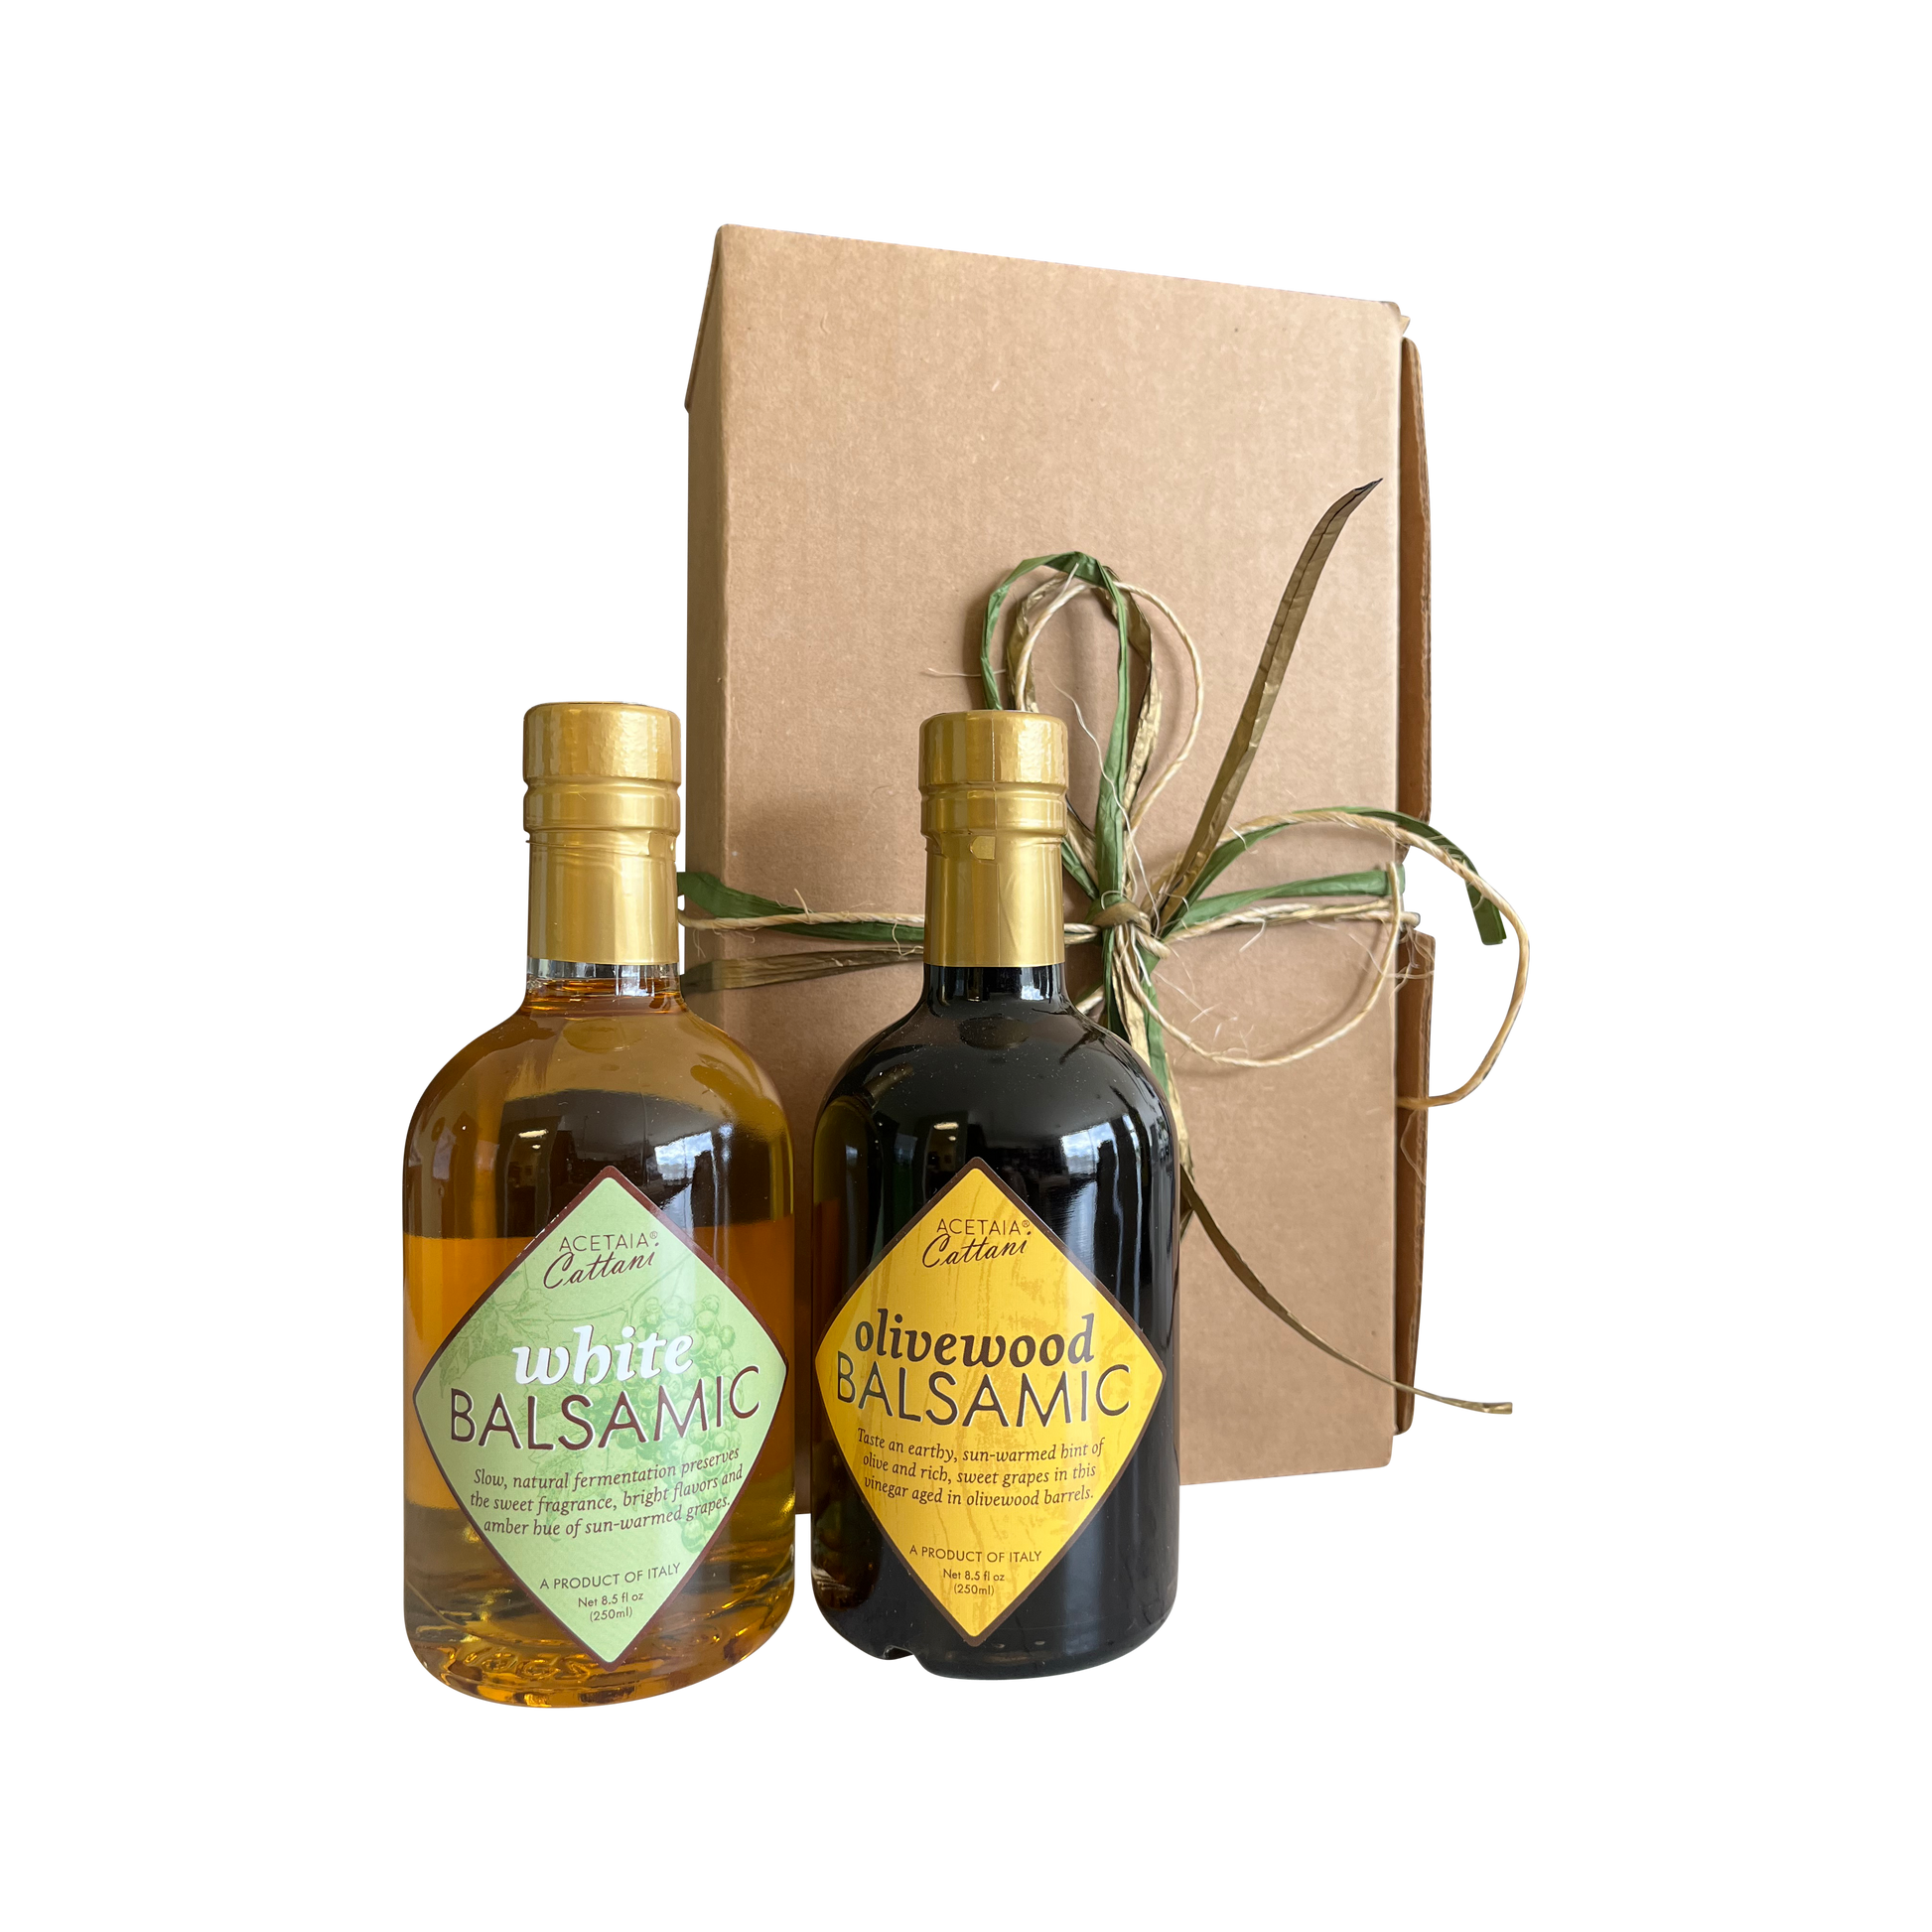 Cattani Duo Gift Set Cattani White Balsamic 250ML and Cattani Olivewood Balsamic 250ML with Brown Rustic Box and Ribbon CAT-023